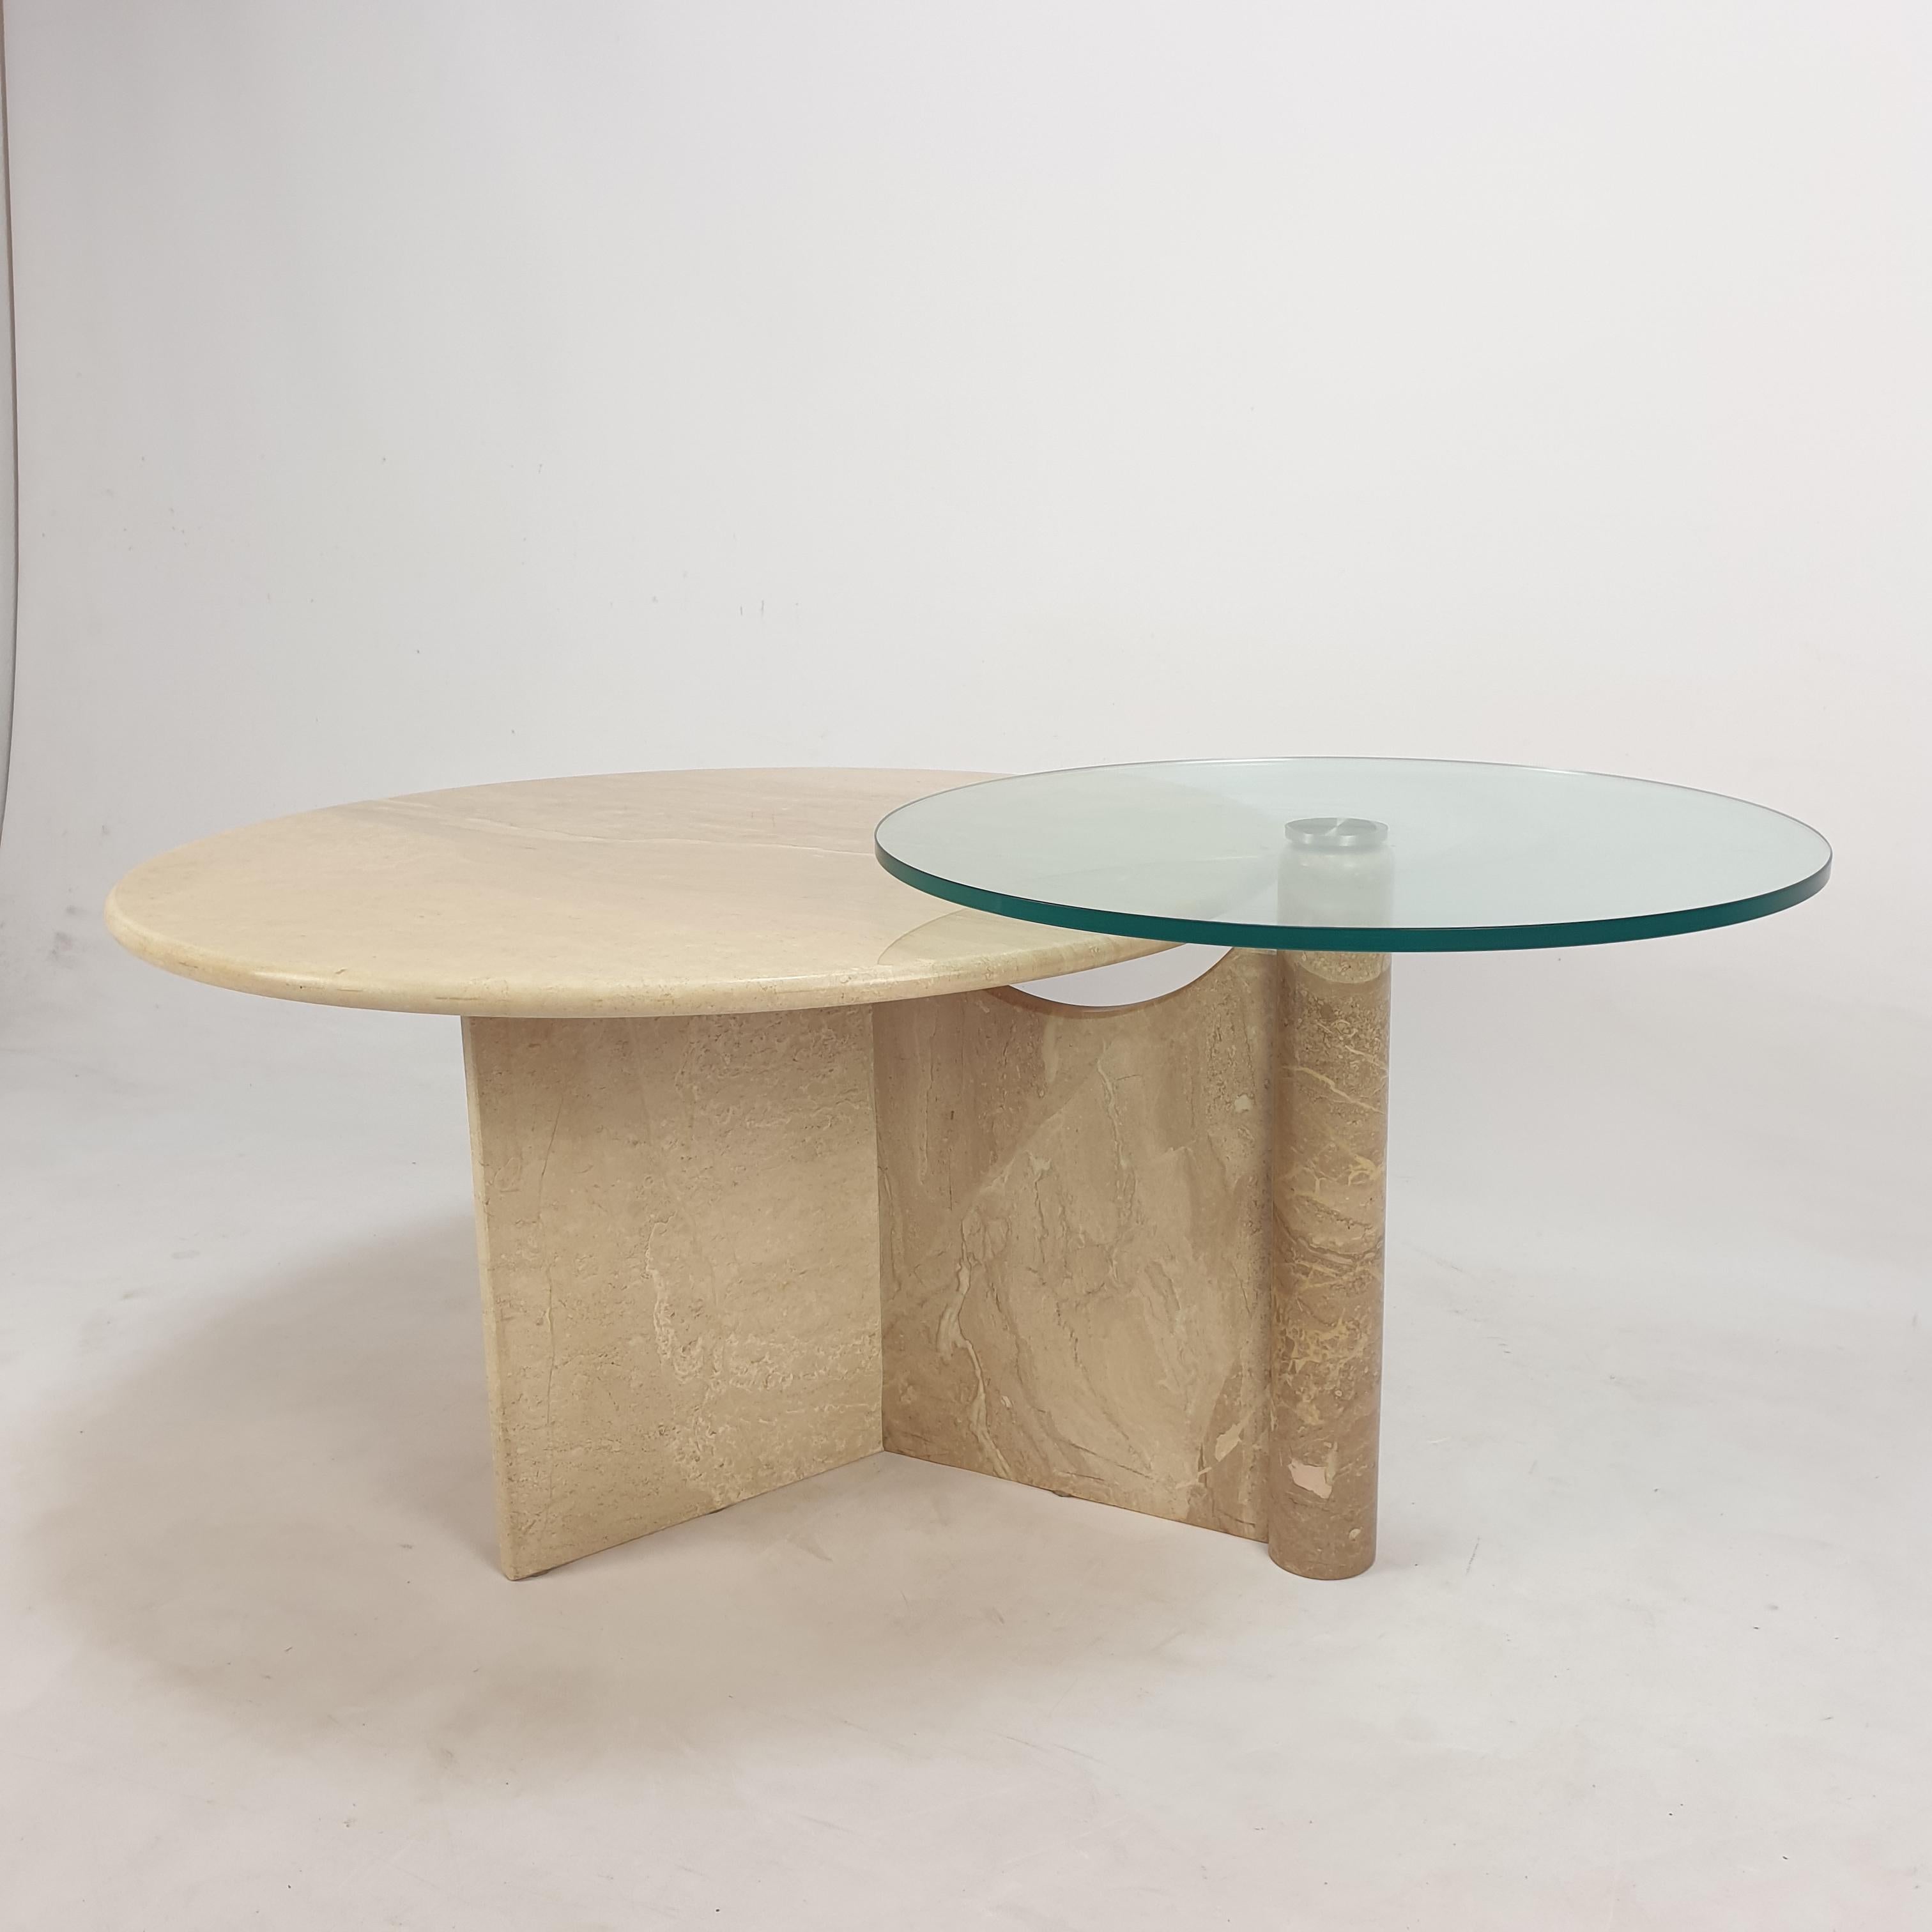 Italian Travertine and Glass Coffee Table, 1980s For Sale 6